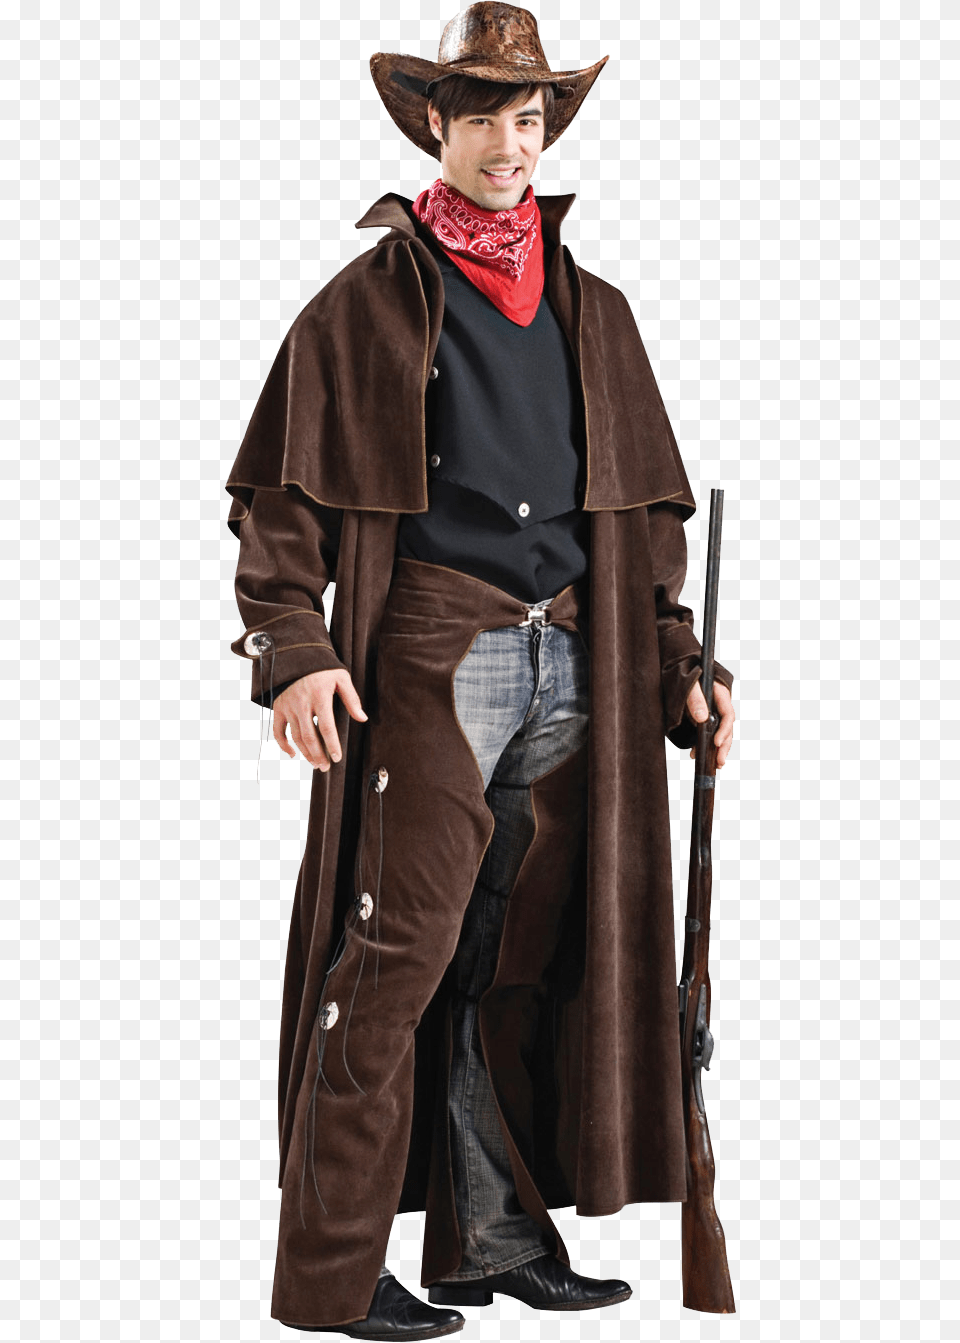 Cowboy, Clothing, Coat, Costume, Person Png